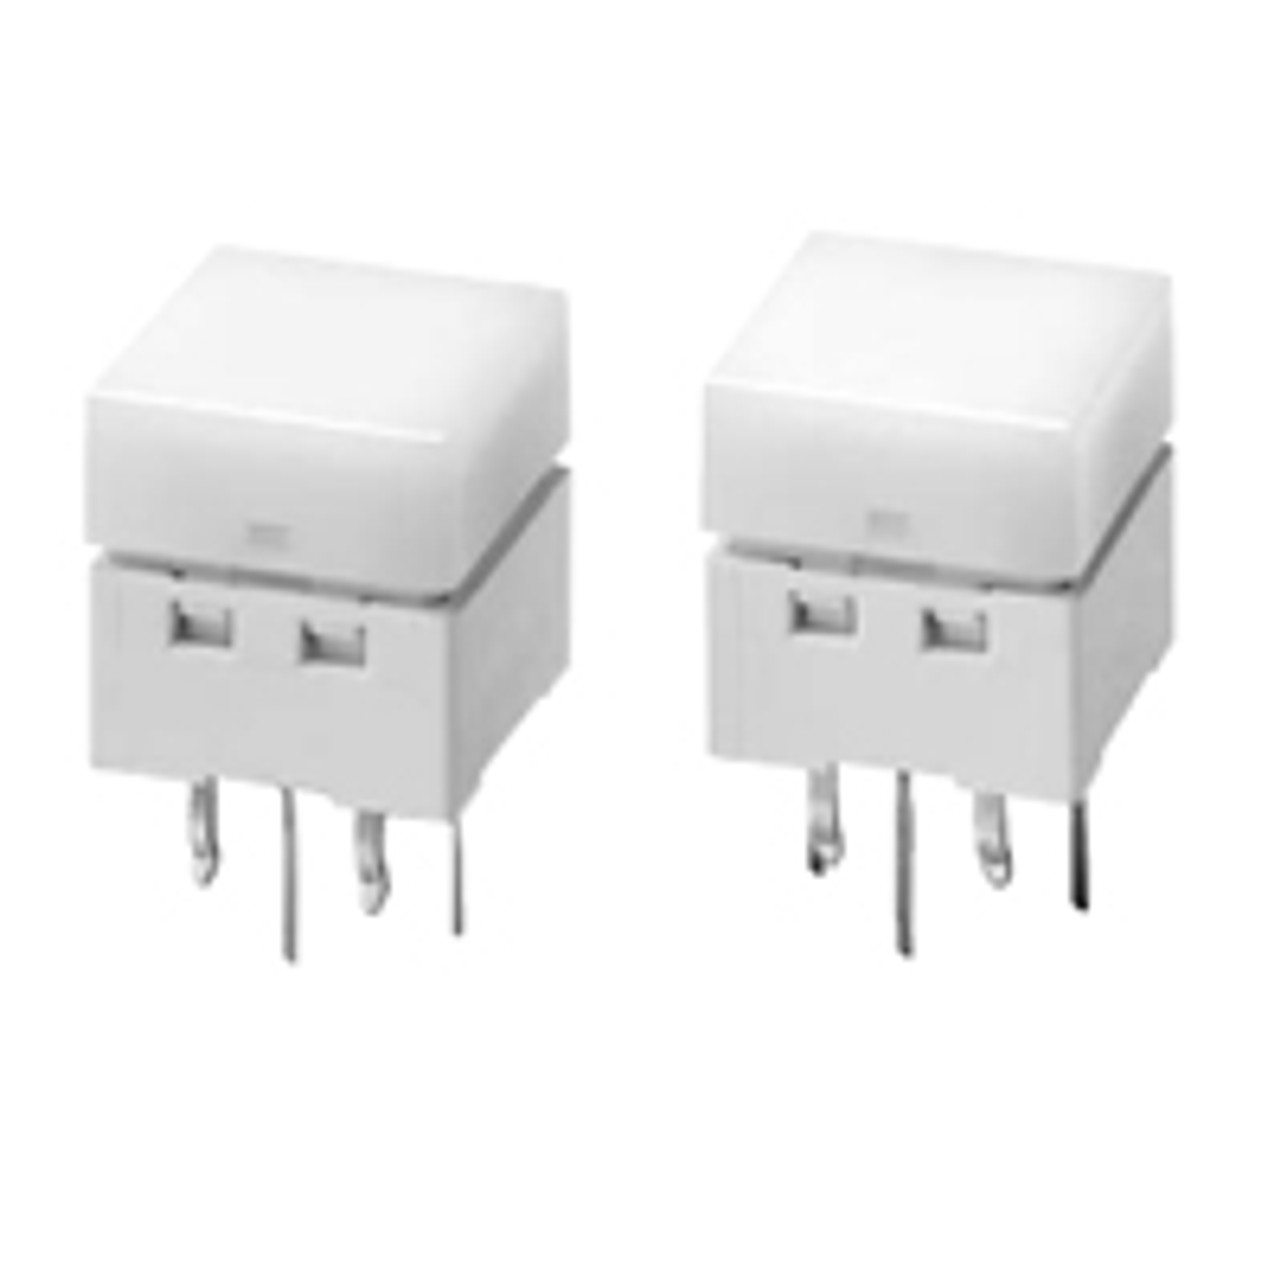 Omron B3W-9012-RB2N Tactile Switches